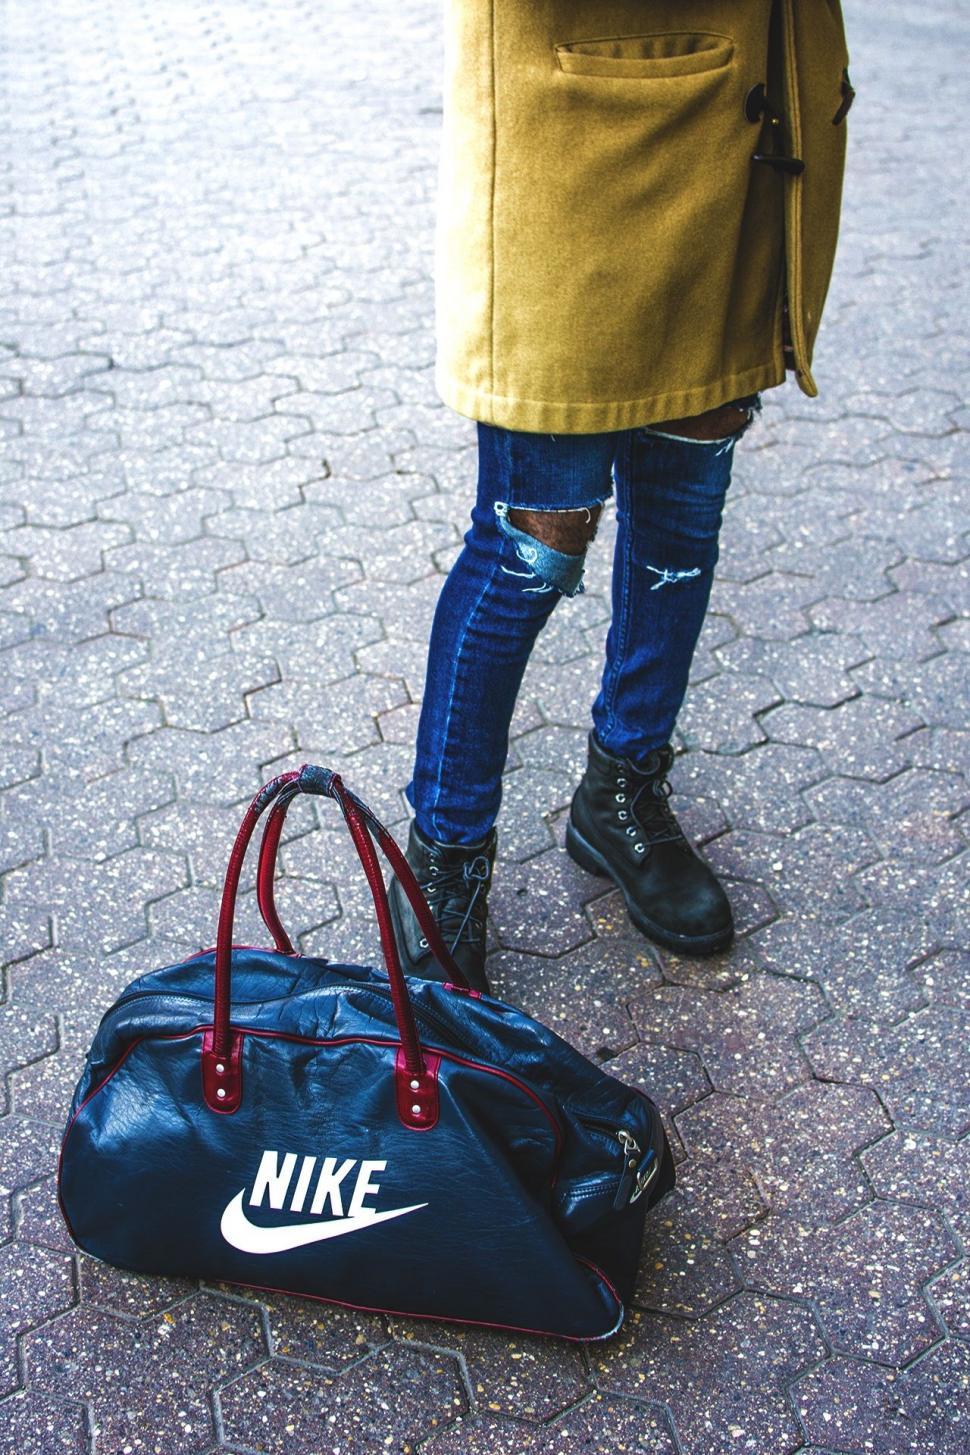 Free Image of Man In Ripped Jeans with Nike Bag  